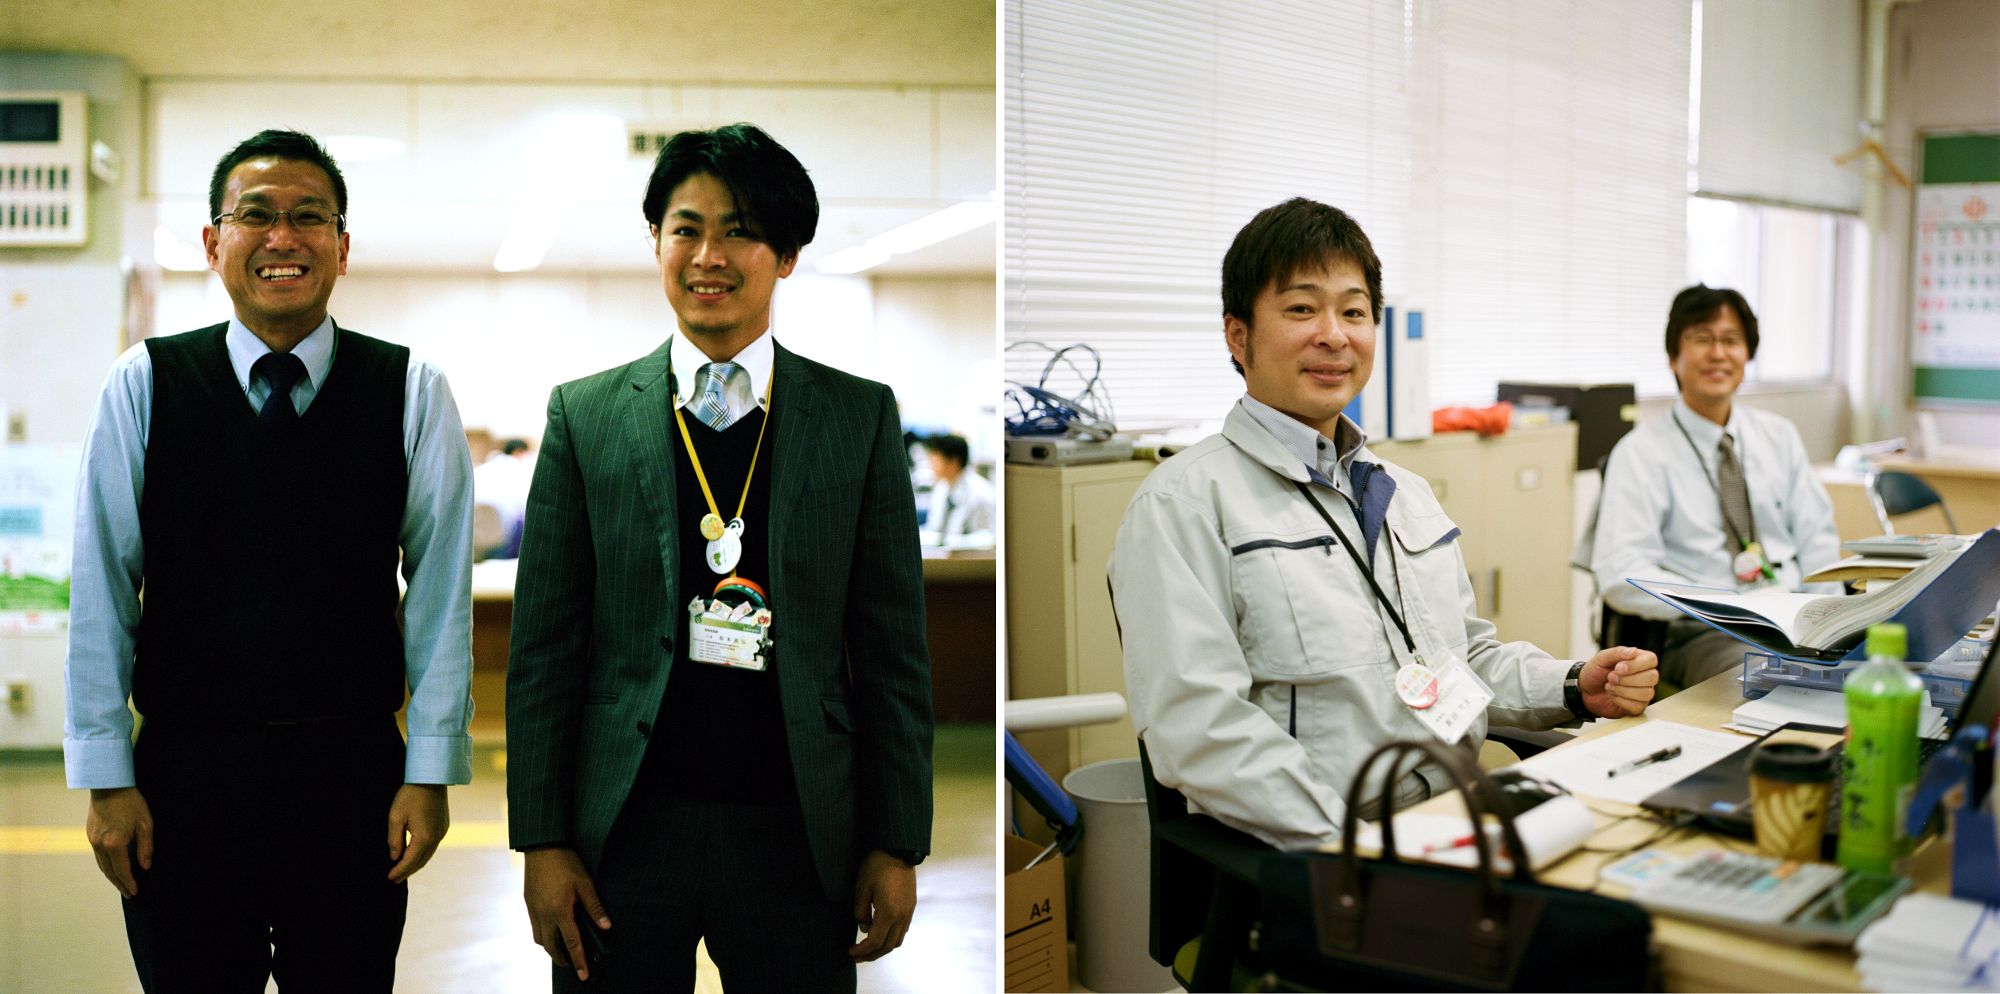  Left, these two people work in Naraha’s town hall. The one to the right, Masahiro Matsumoto, is a native of Naraha but his house was washed away by the tsunami. He doesn’t have the money to rebuild and anyway. Right, these two men work at the Naraha